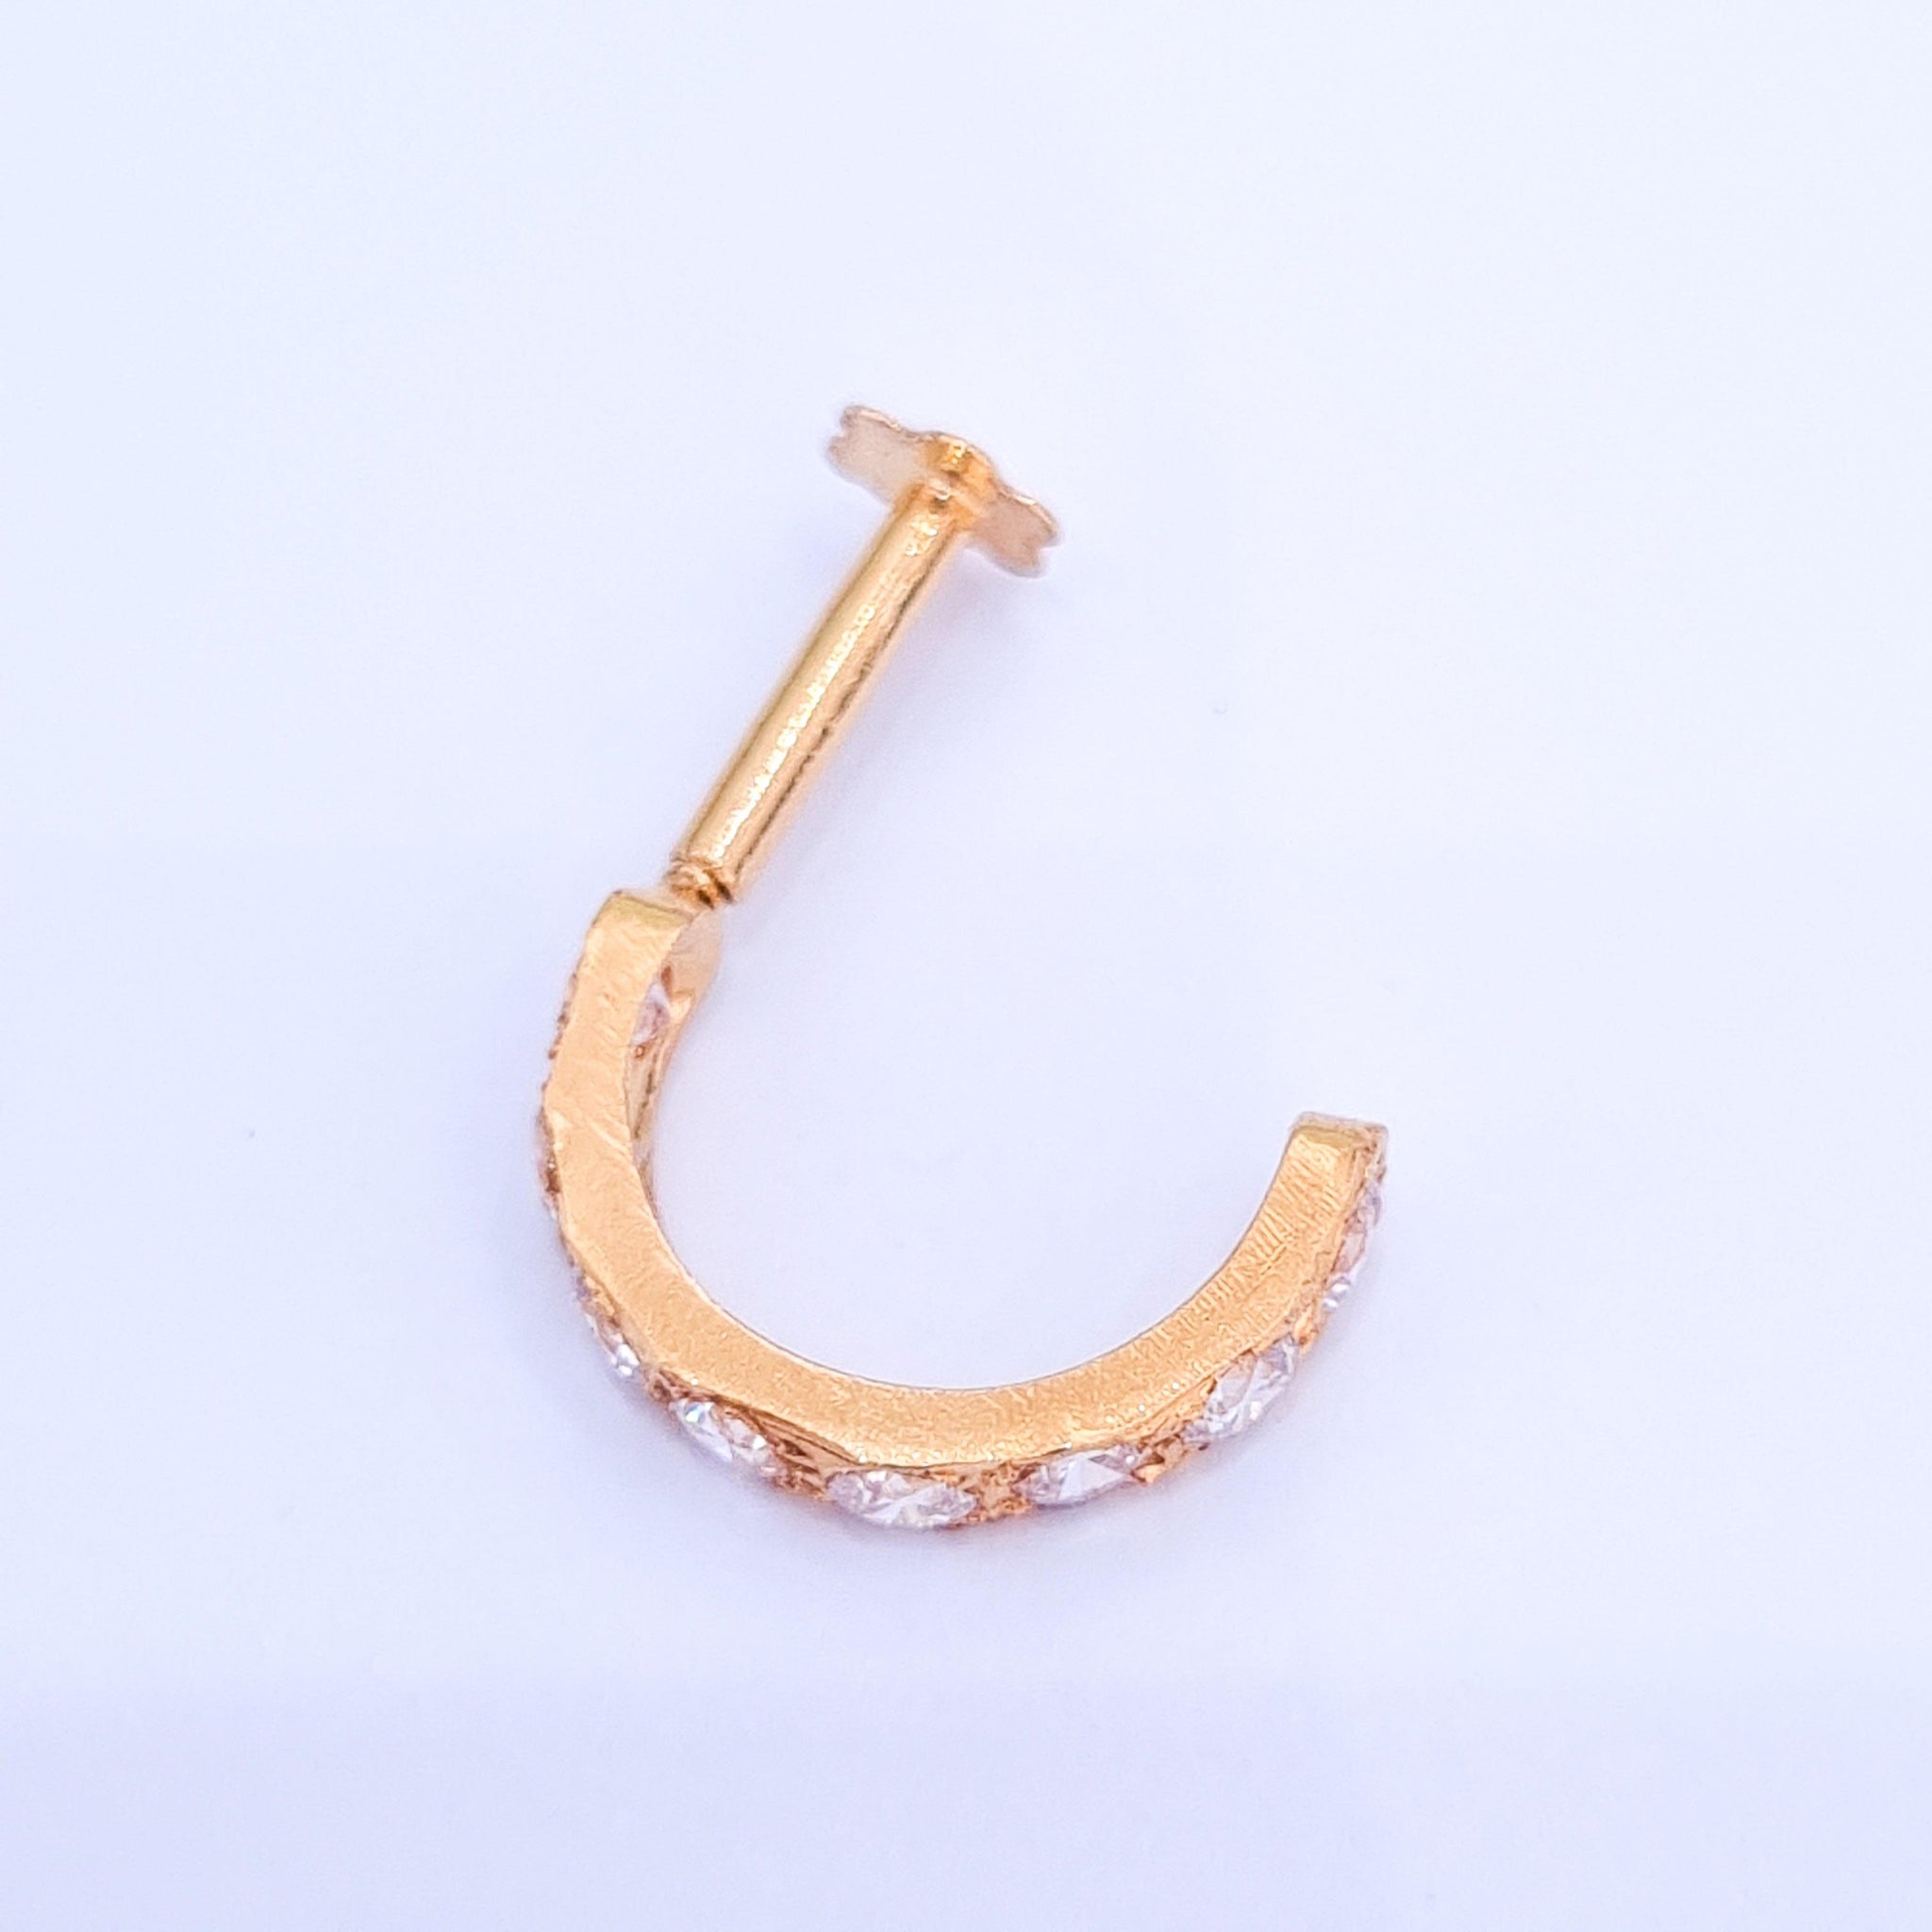 18ct Yellow Gold Faux Nose Ring with Screw Back Nose Stud with 8 Cubic Zirconias NS-2420